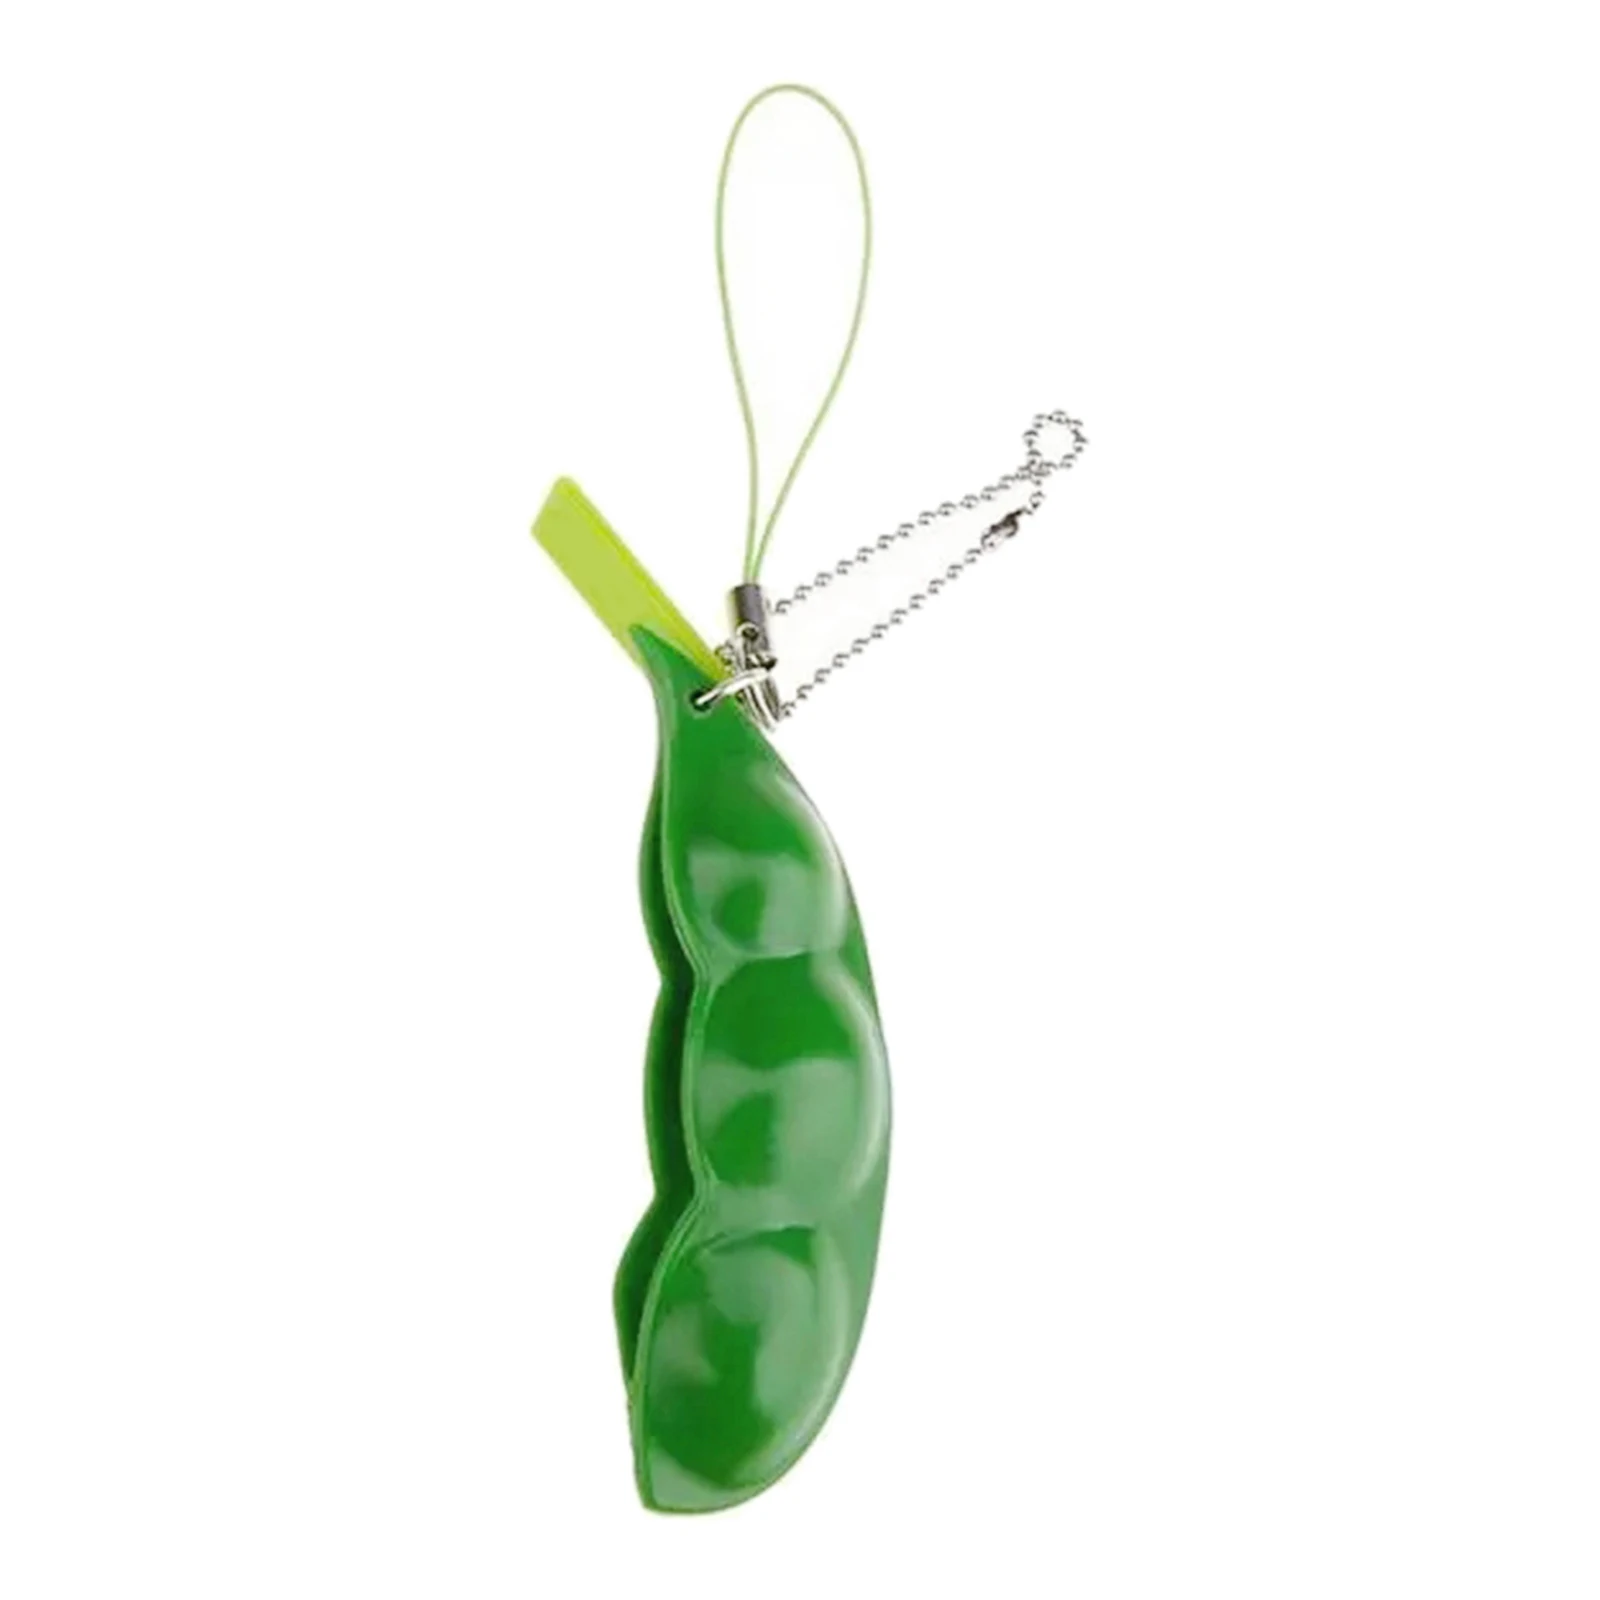 Squeeze Bean Keychain Squeeze Bean Toy Keychain Relax Toy Squeeze Bean Key Chain Fun Beans Squeeze Toys Pendants